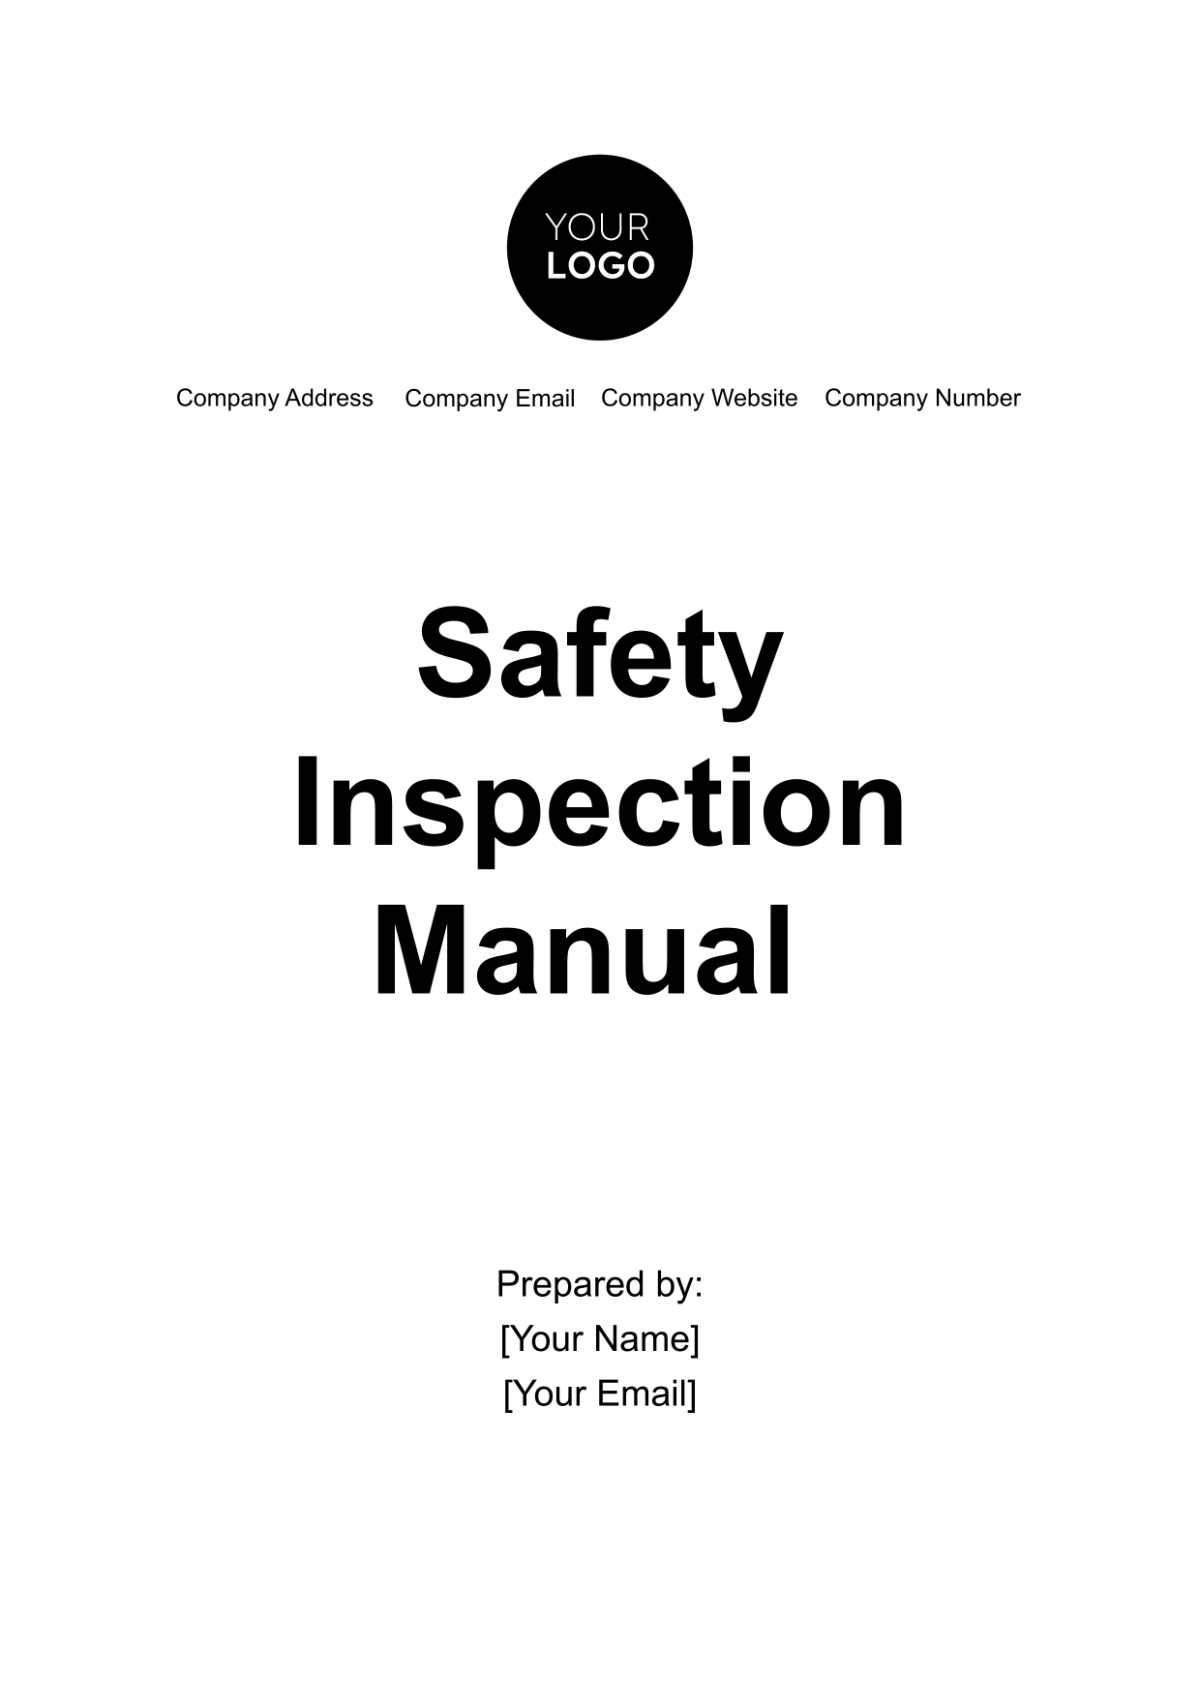 Safety Inspection Manual Template